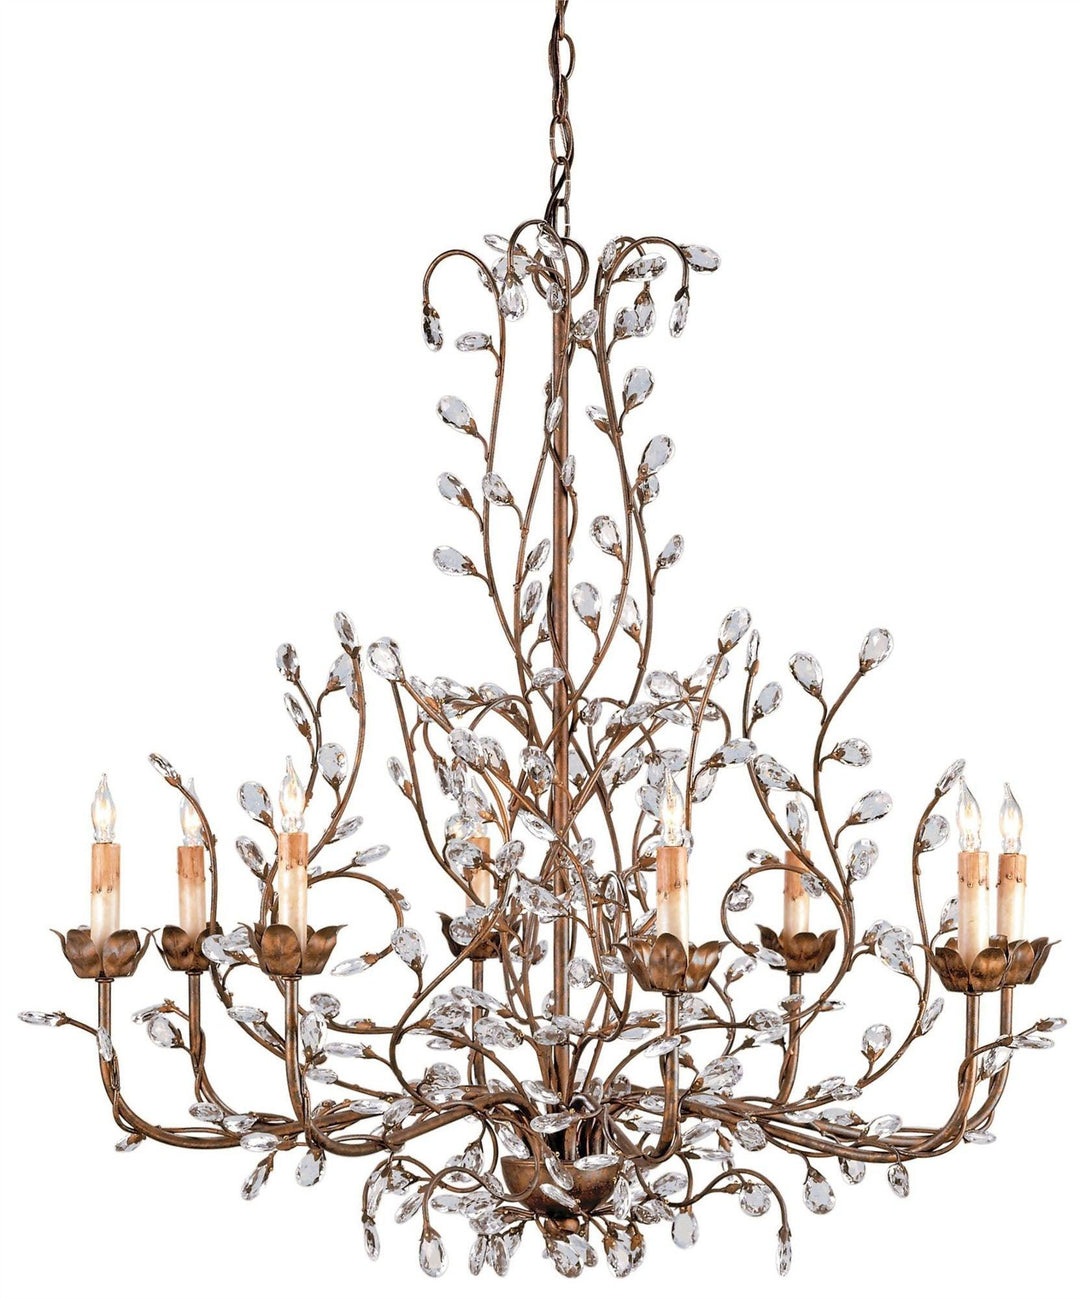 Crystal Bud Cupertino Large Chandelier - Casey & Company